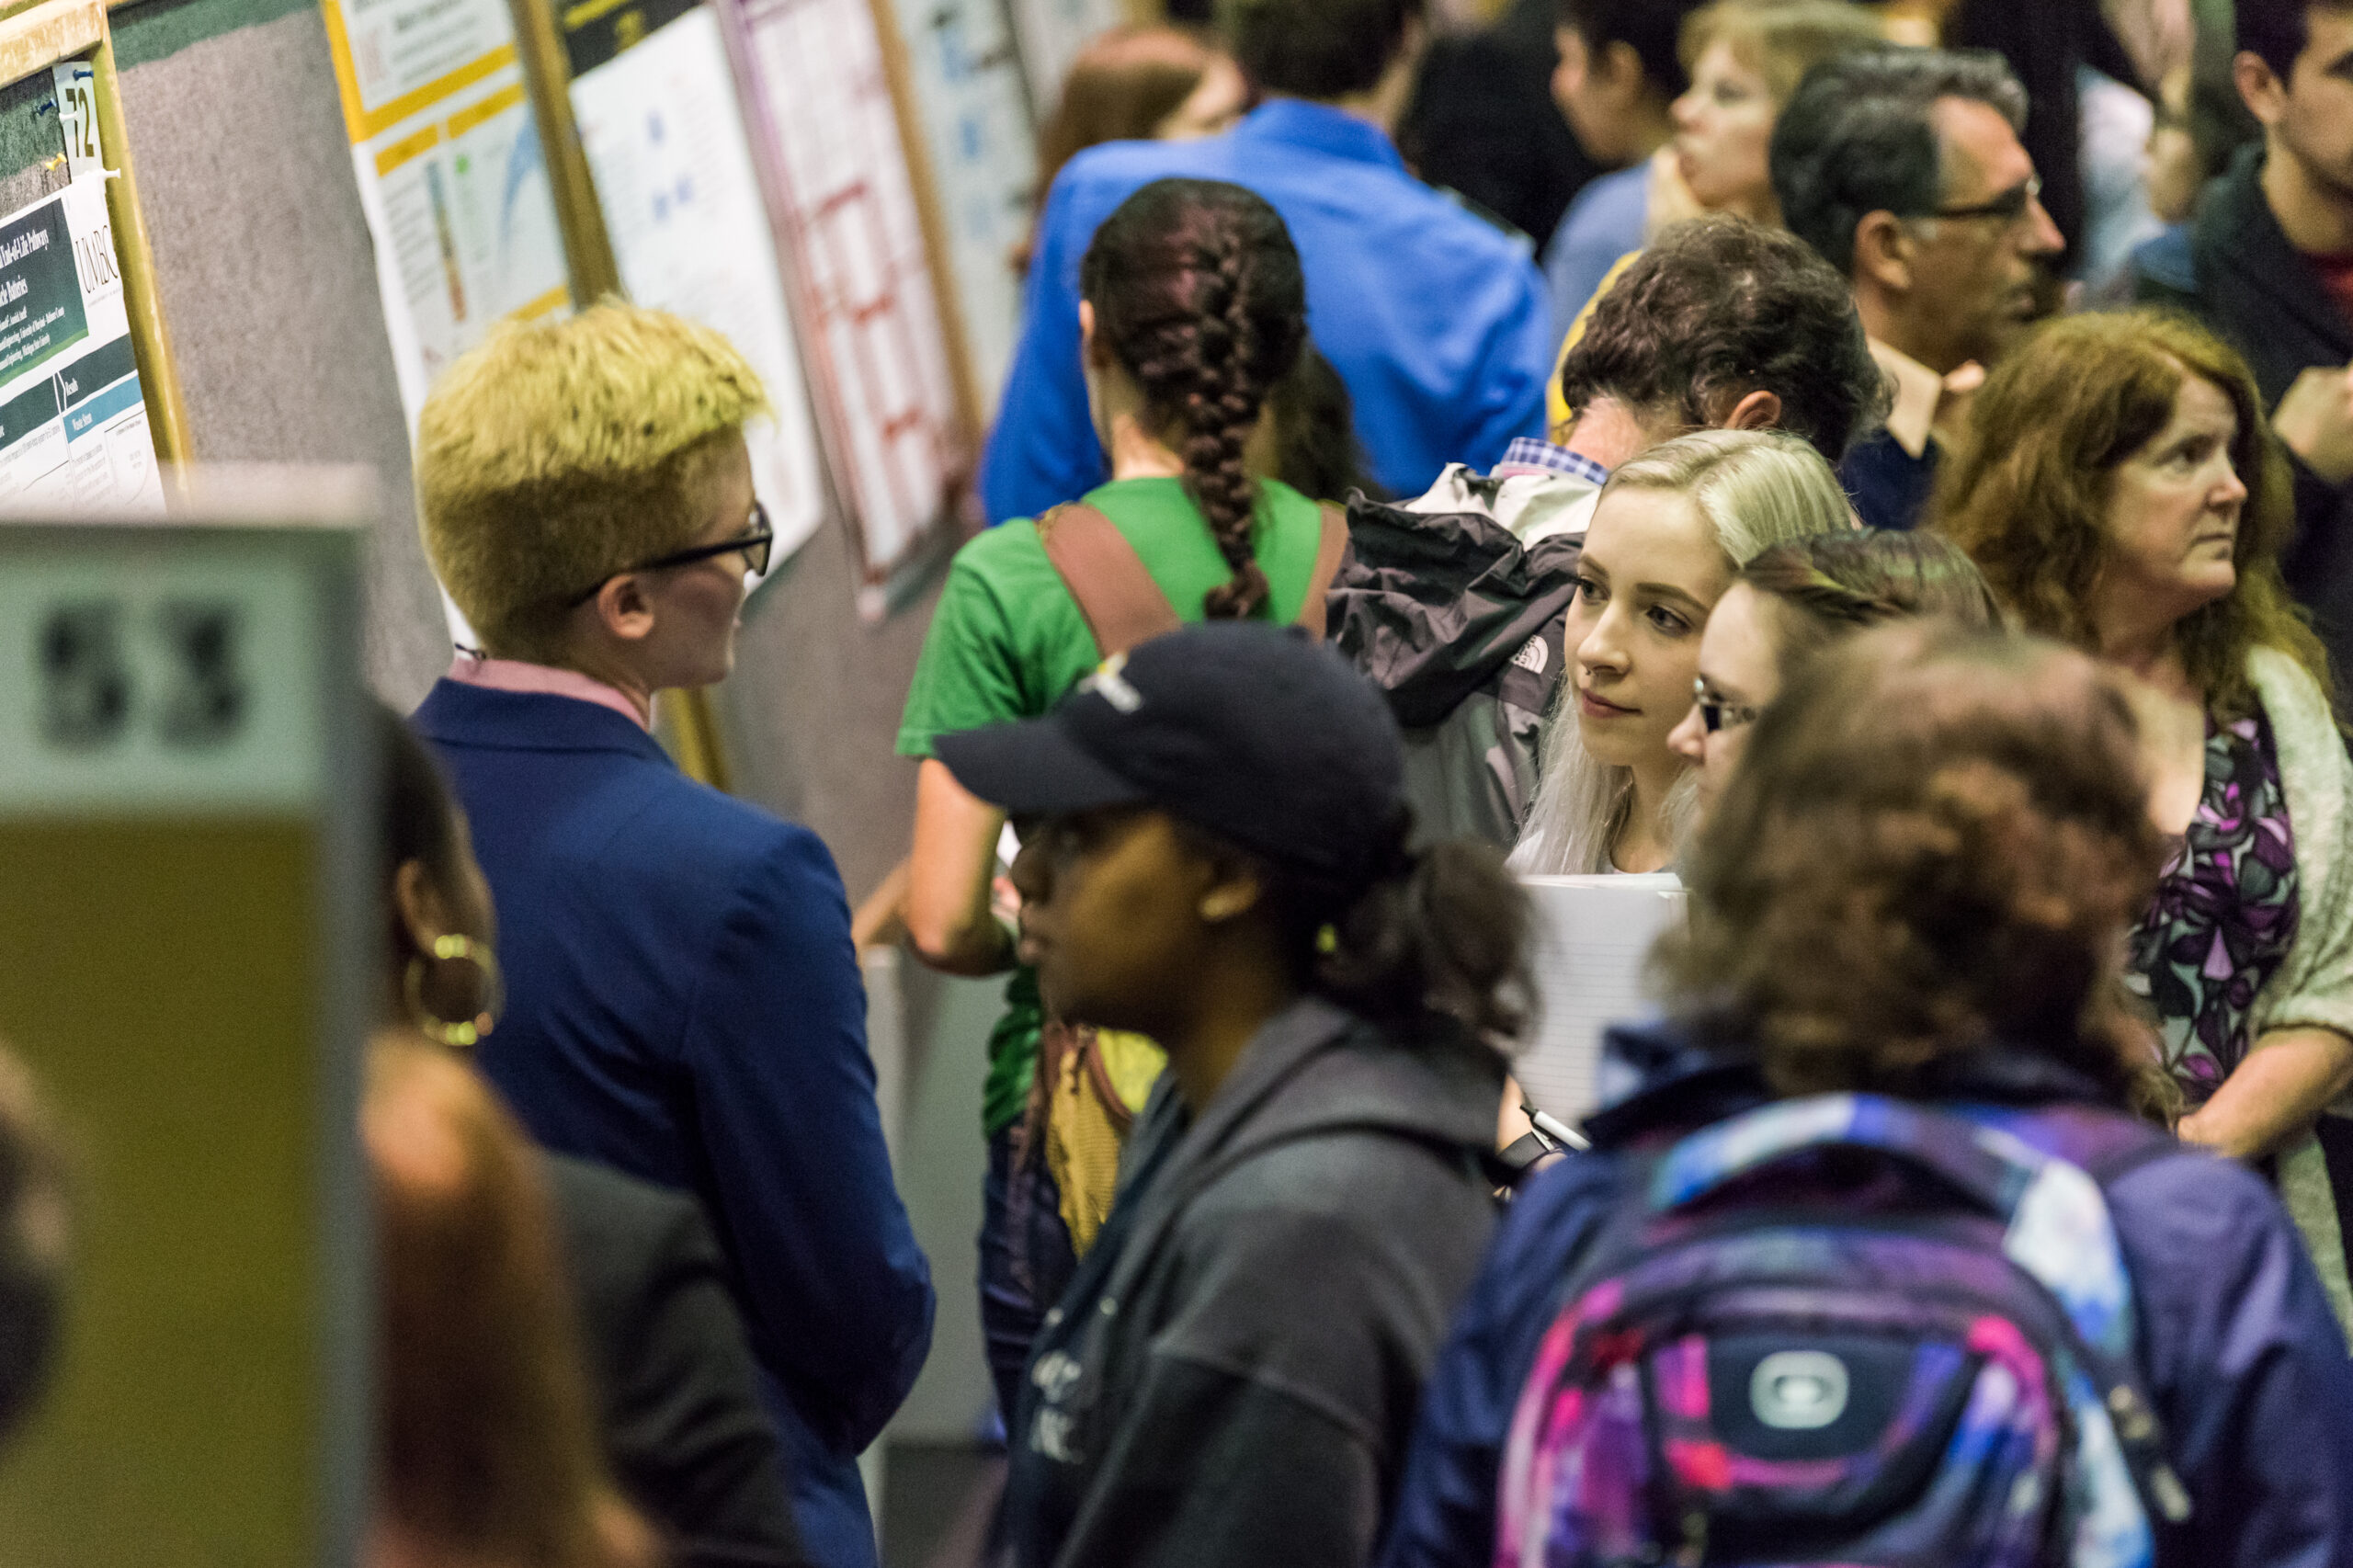 URCAD 2019 features diversity-focused student research, with Baltimore, LGBTQ+, and international focus areas